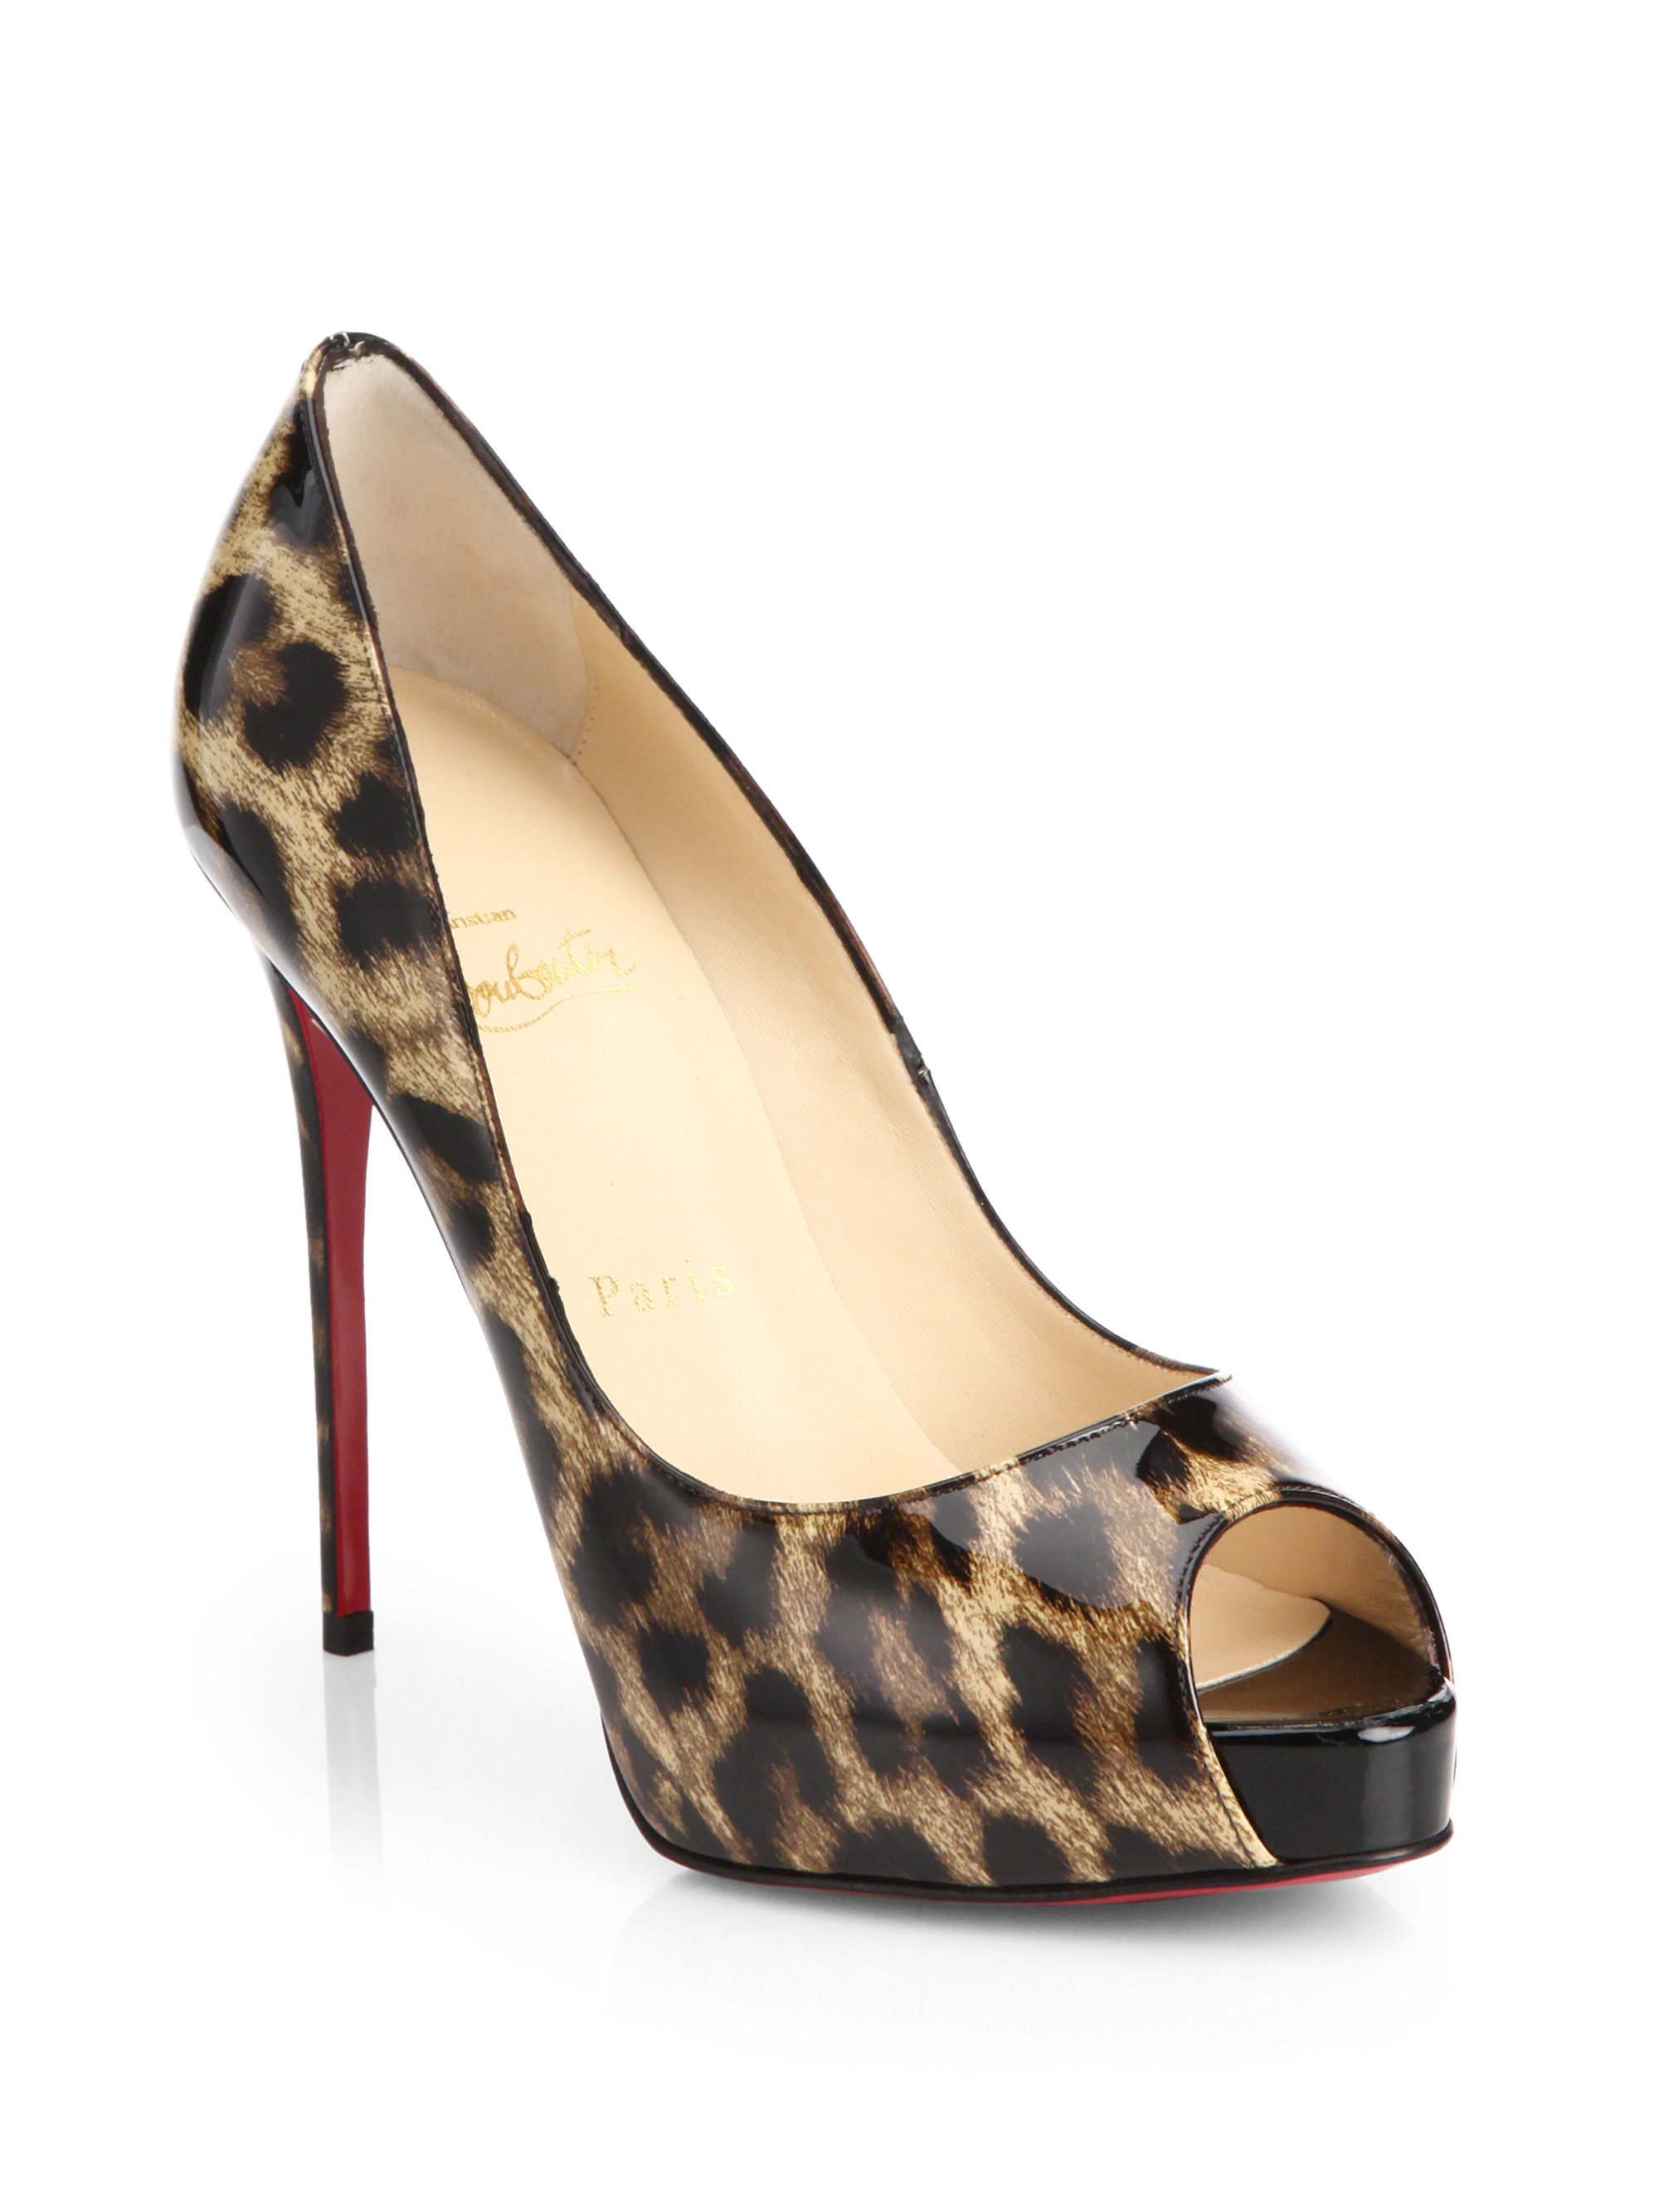 Christian Louboutin Leather Very Prive Leopard-Print Pumps - Lyst